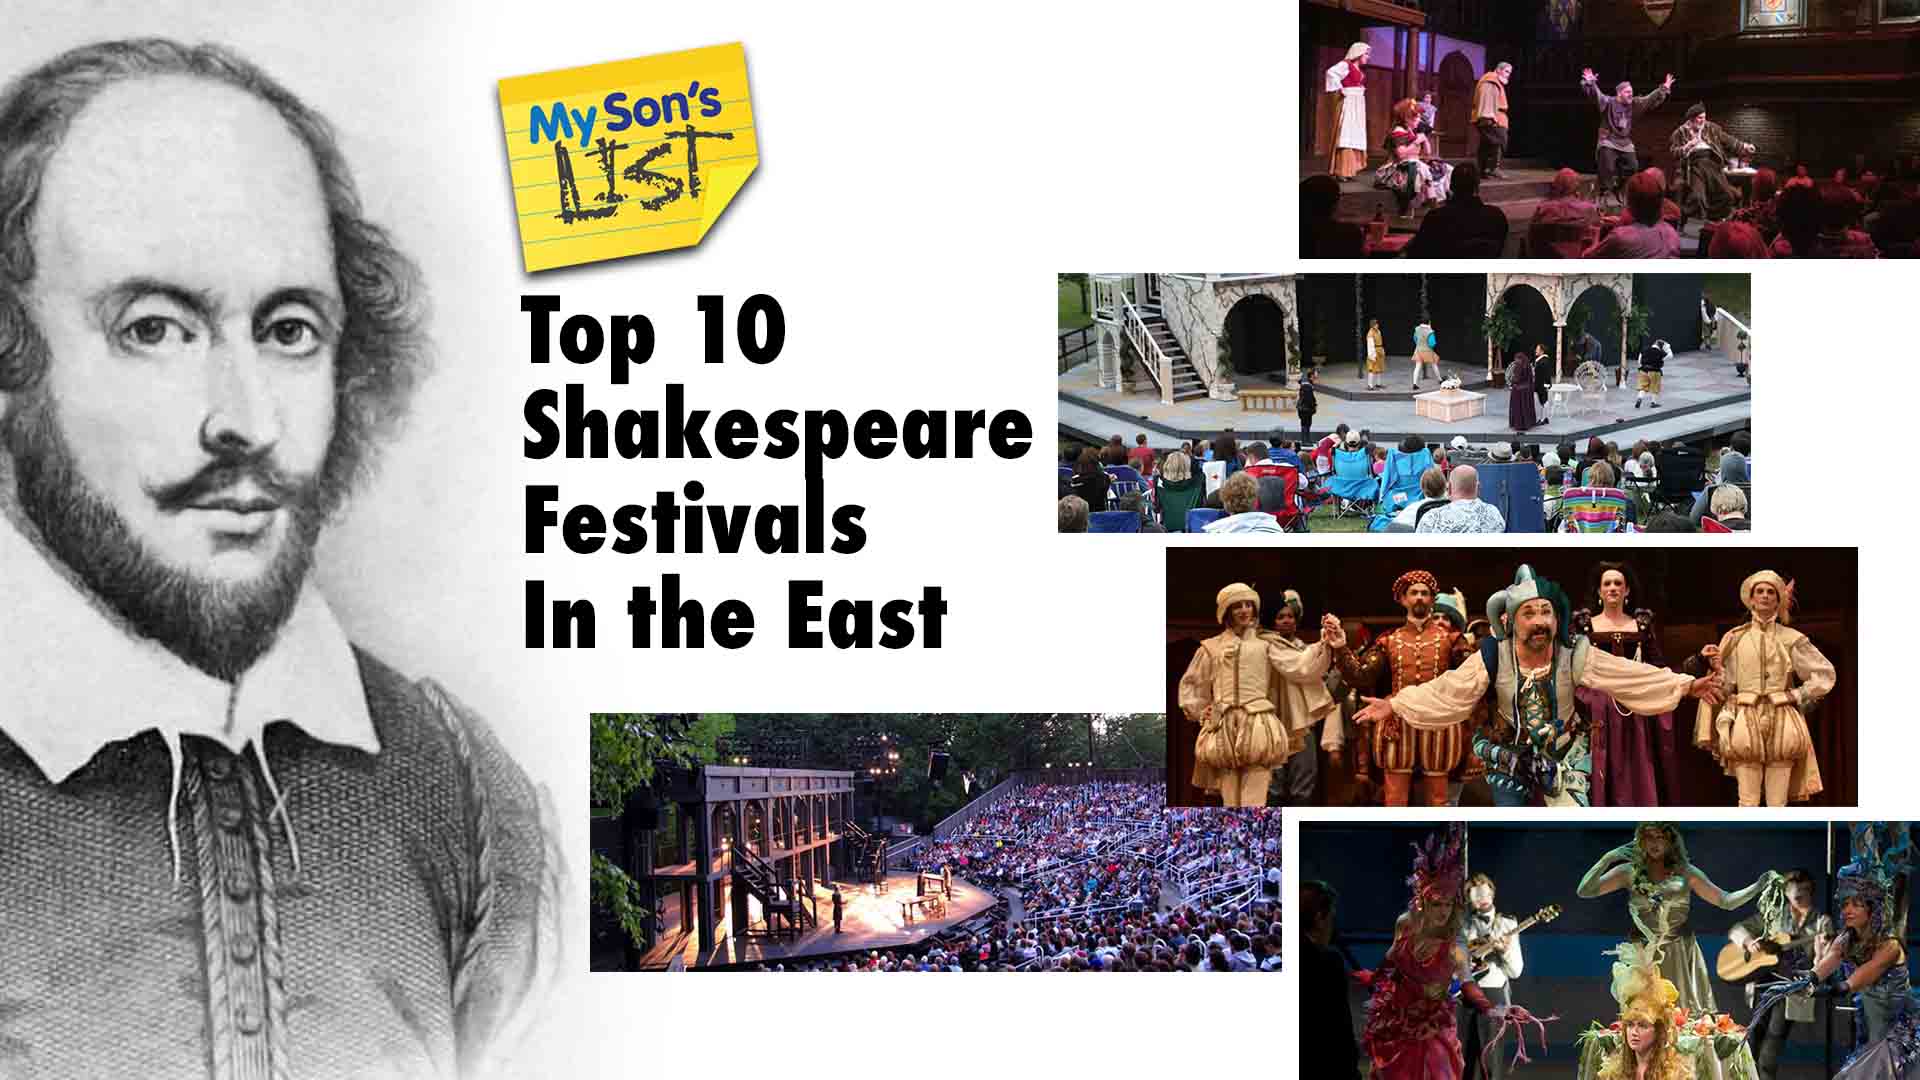 Top 10 U.S. Shakespeare Festivals In the East